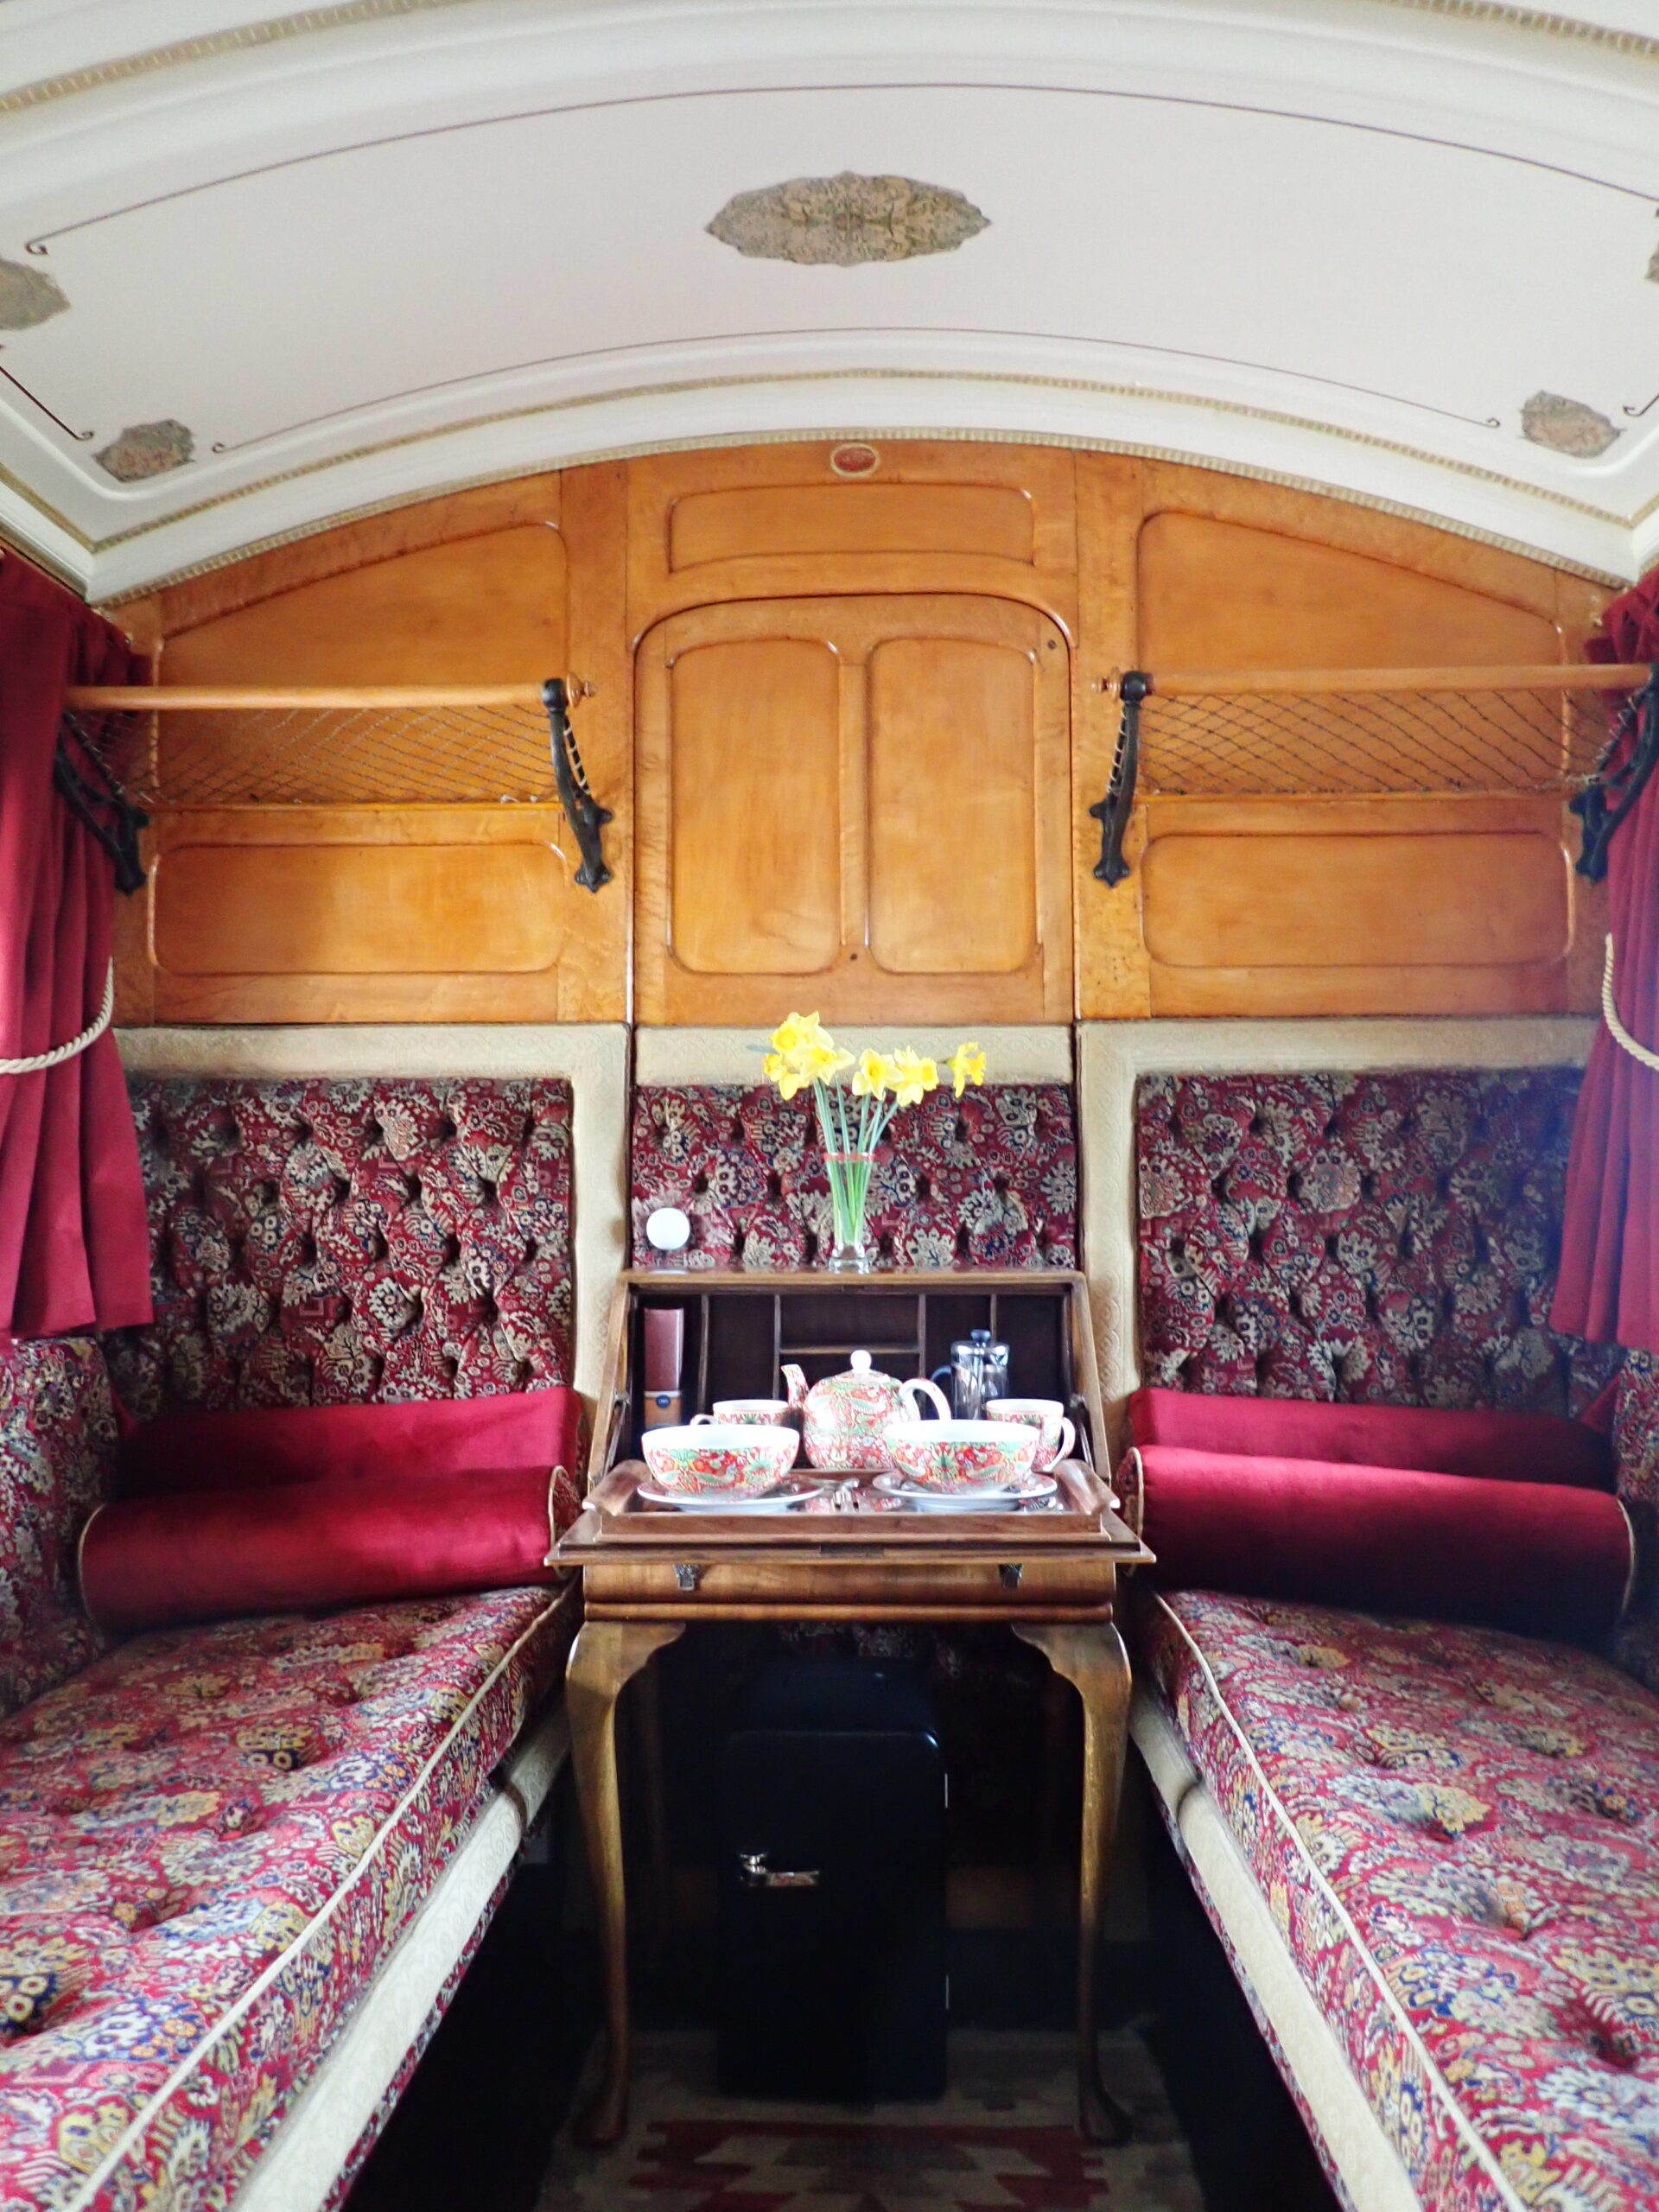 The Carriage Suite